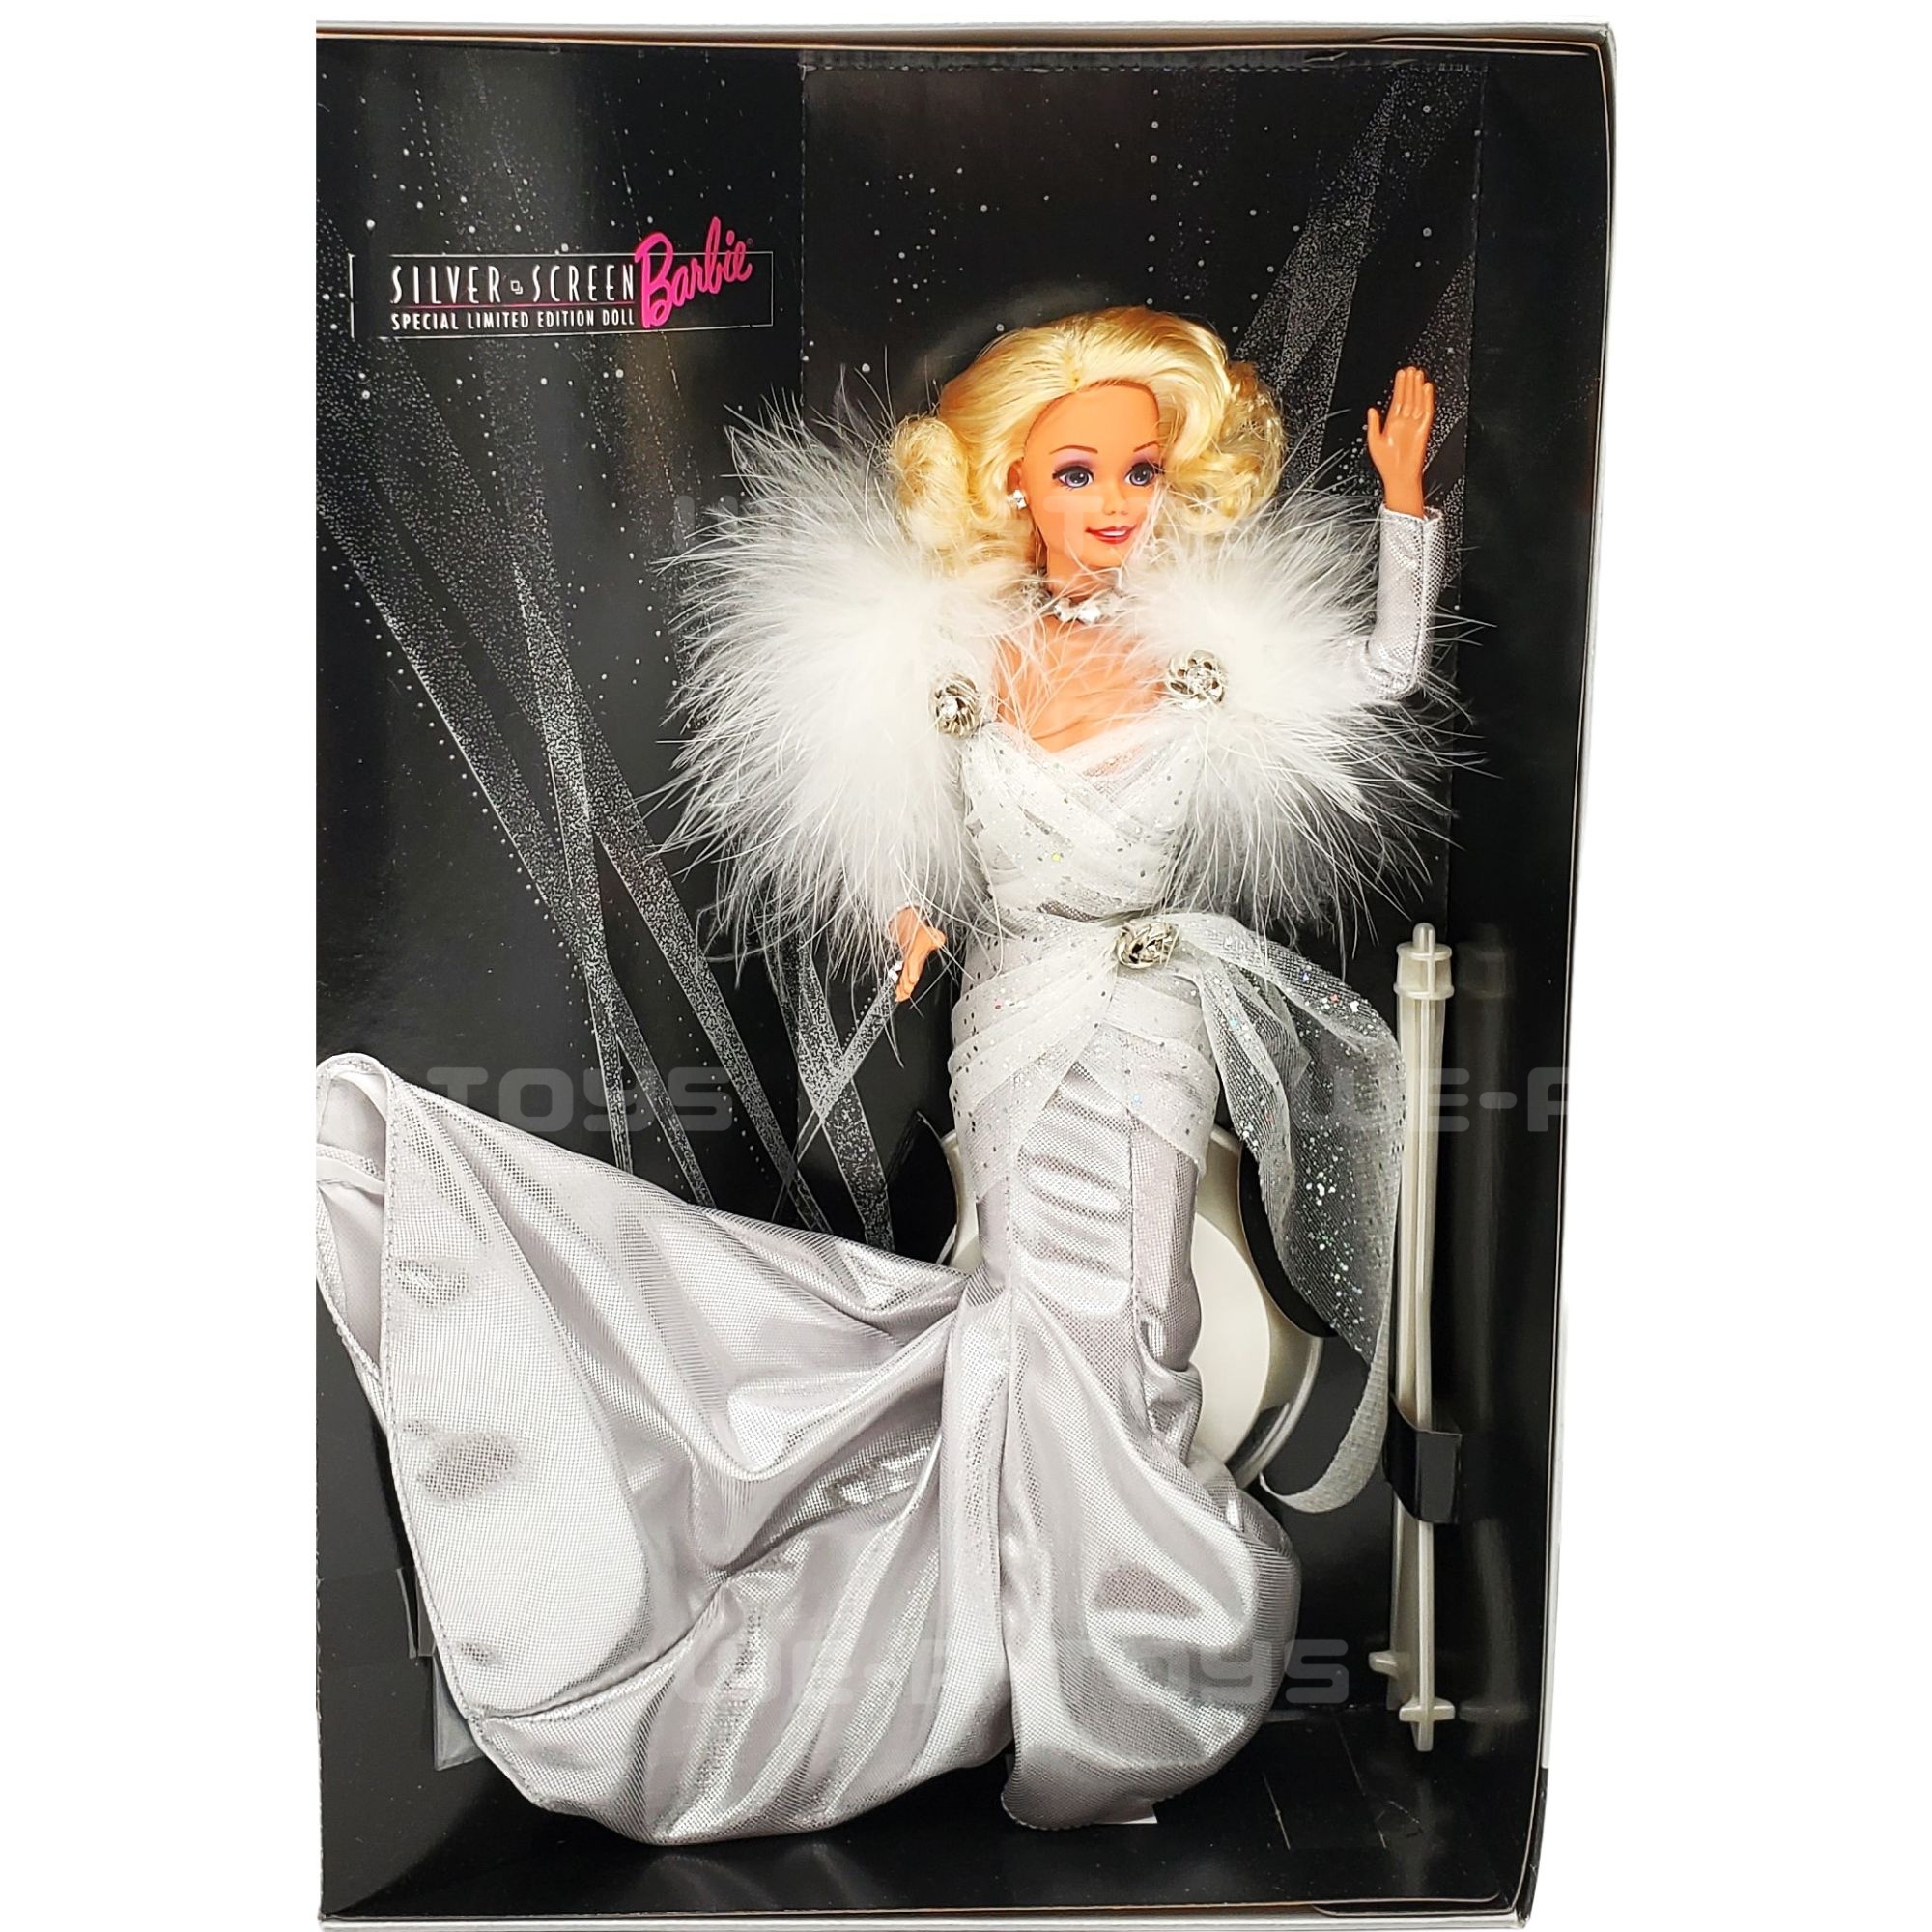 Silver Screen Barbie Doll FAO Schwarz Exclusive Special Limited Edition 1993 - image 4 of 6